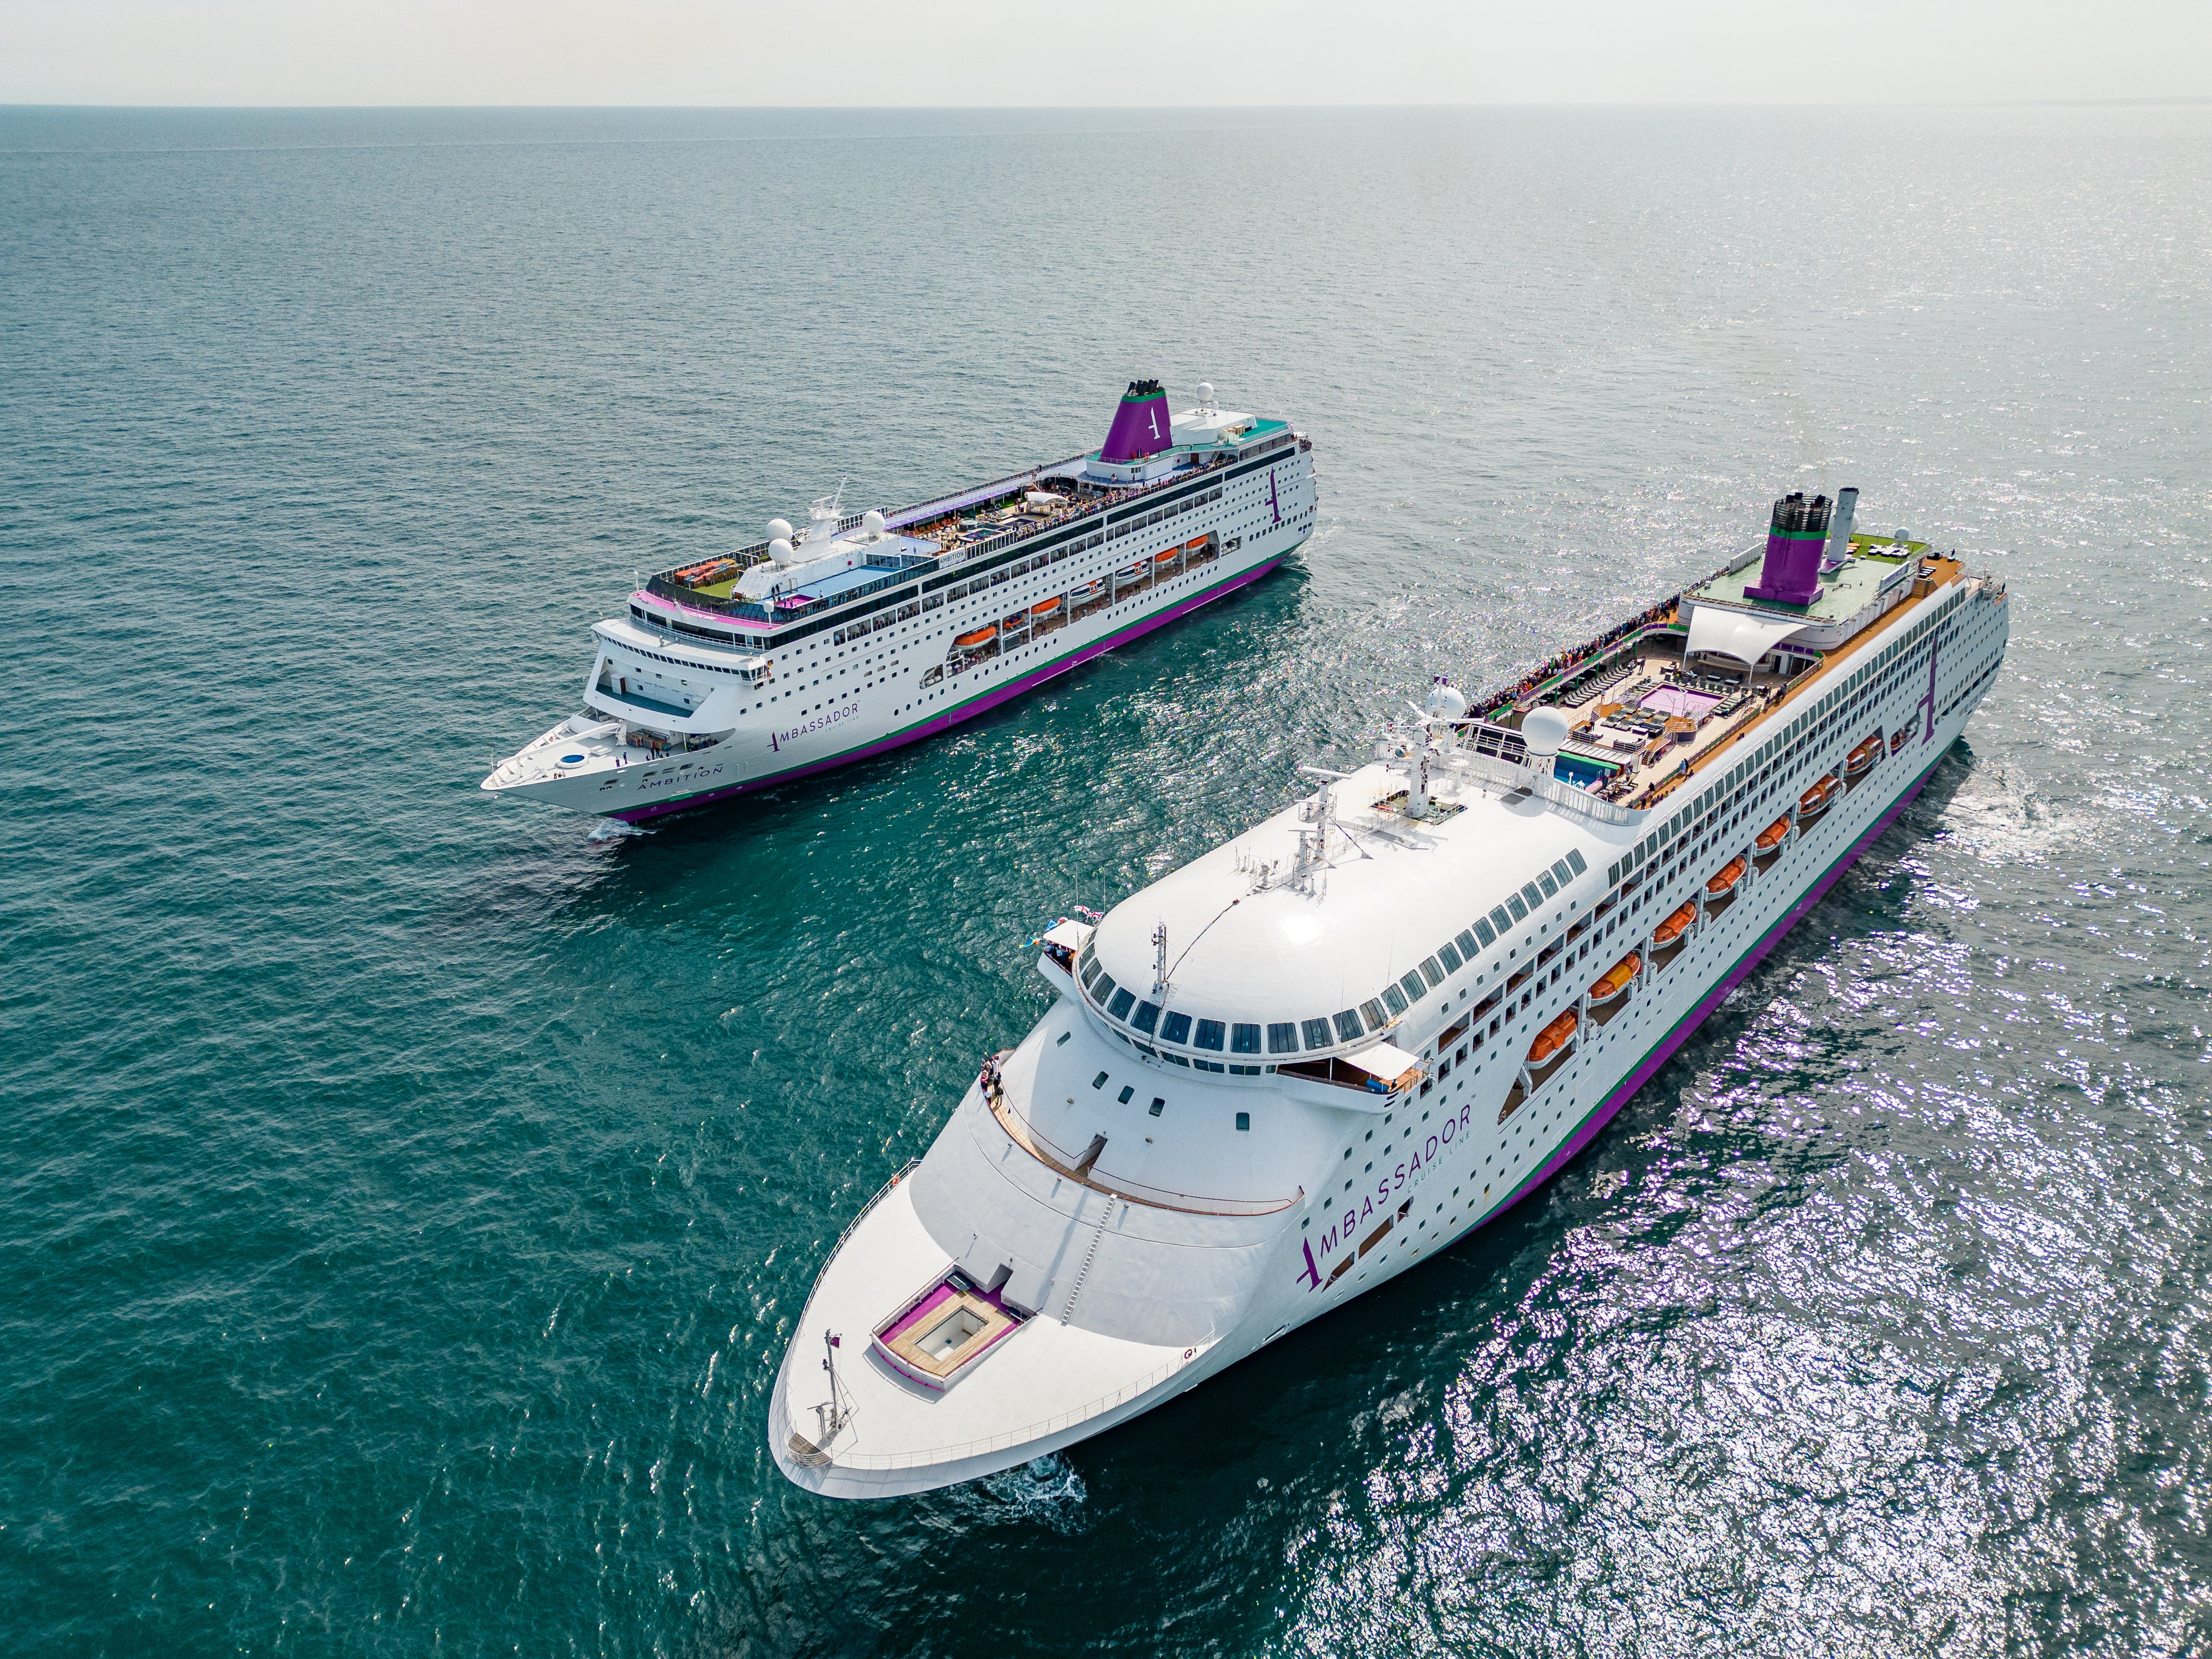 Ambassador Cruise Line launched in 2021